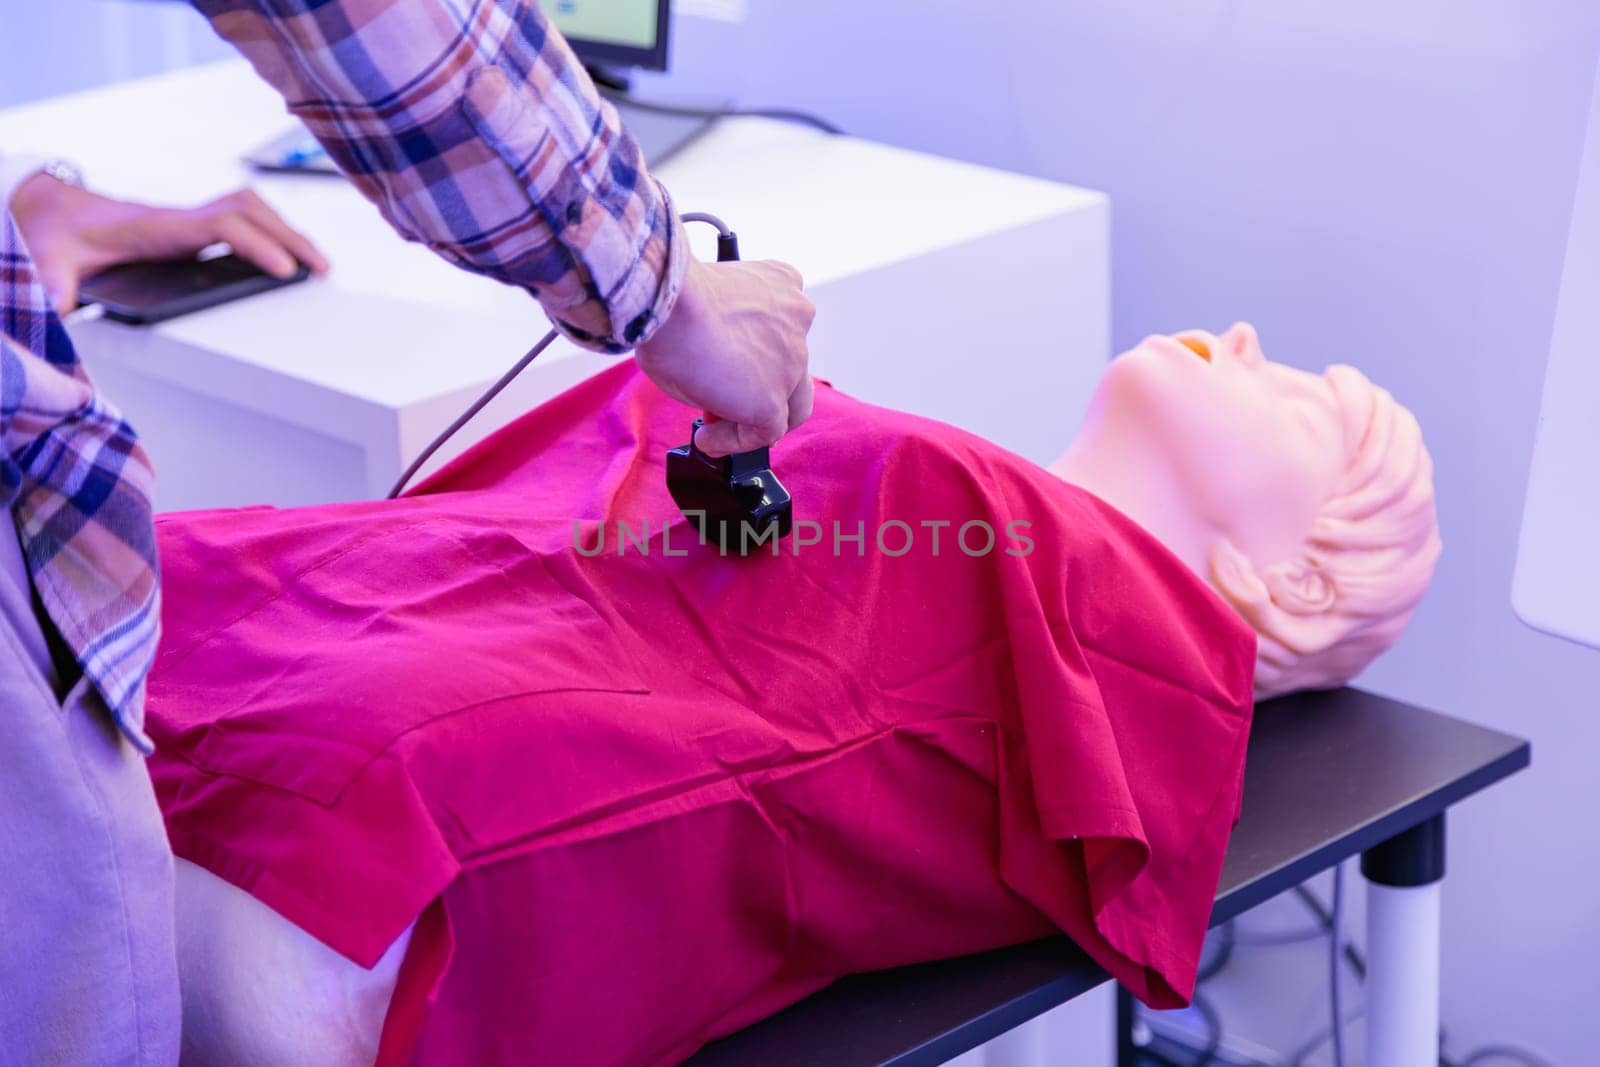 A man tries ultrasound on a mannequin at a health care expo. High quality photo